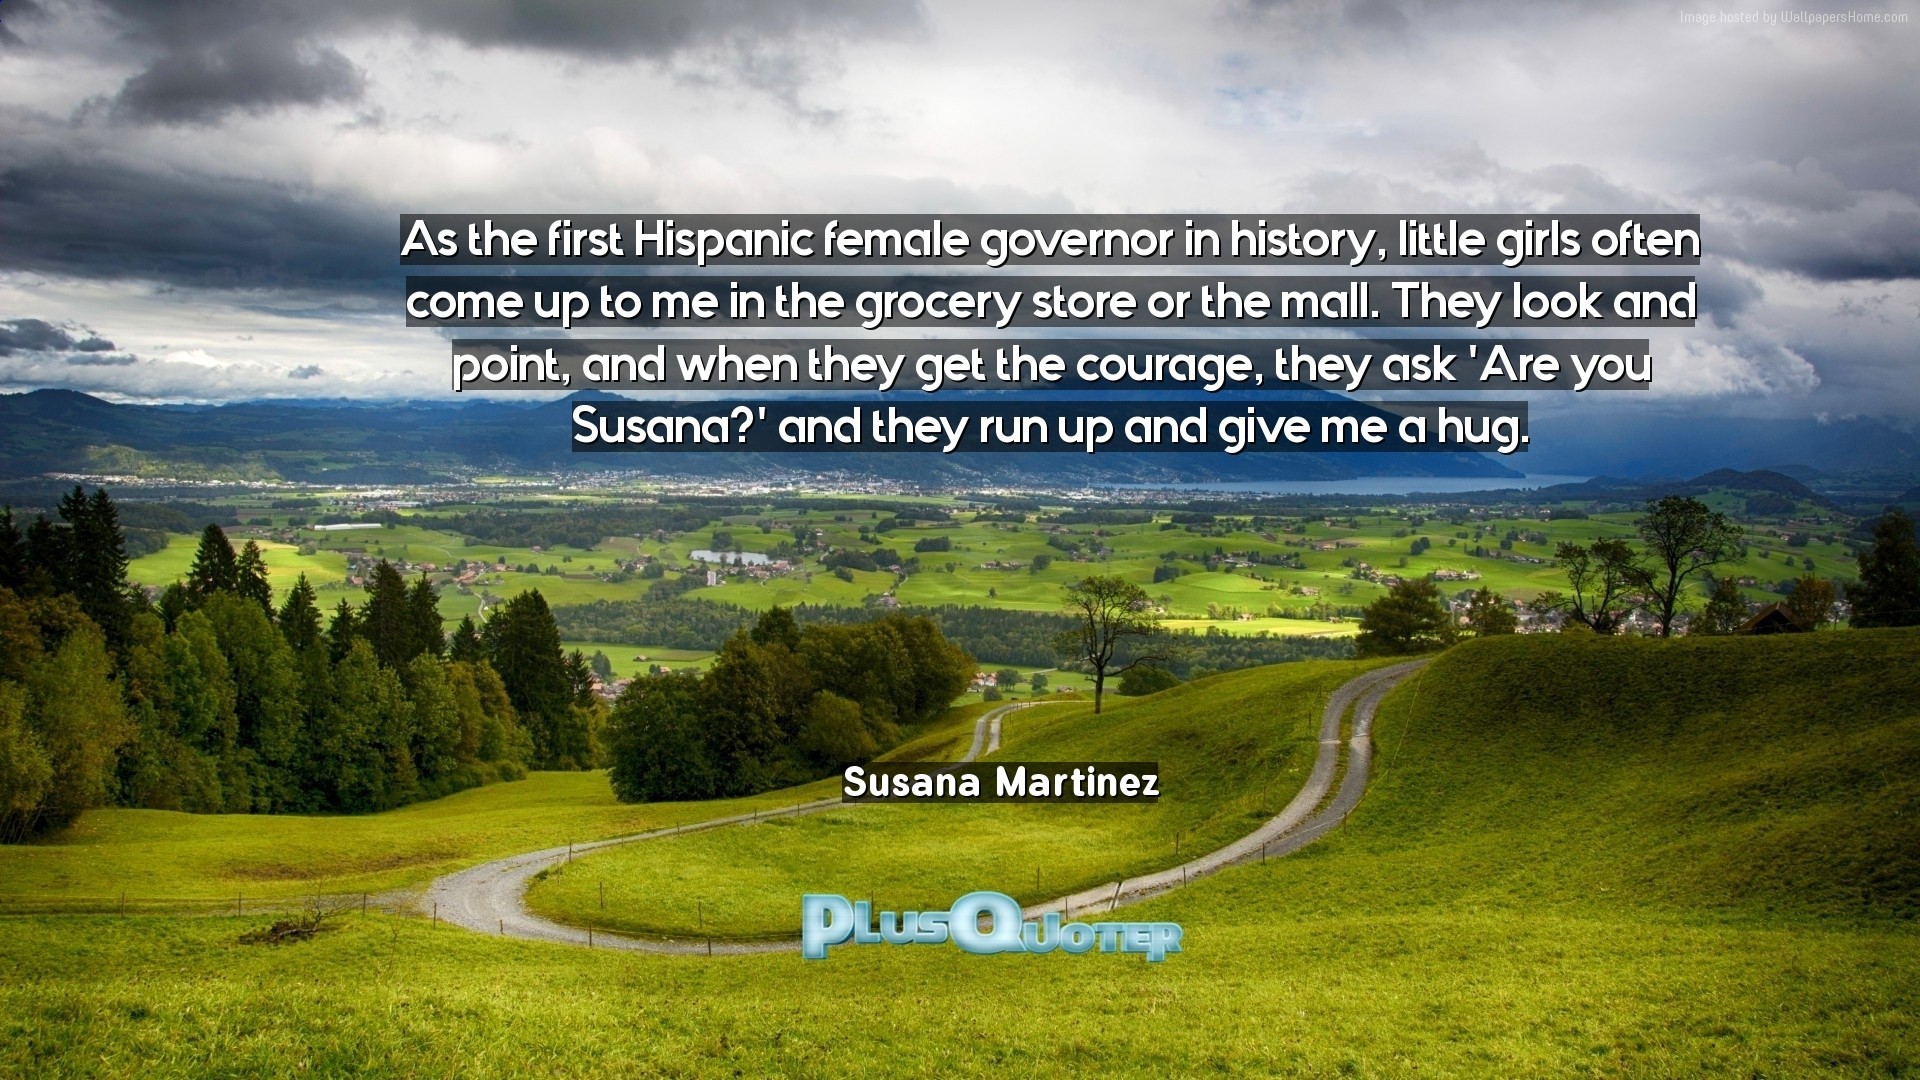 1920x1080 Download Wallpaper with inspirational Quotes- "As the first Hispanic female  governor in history,